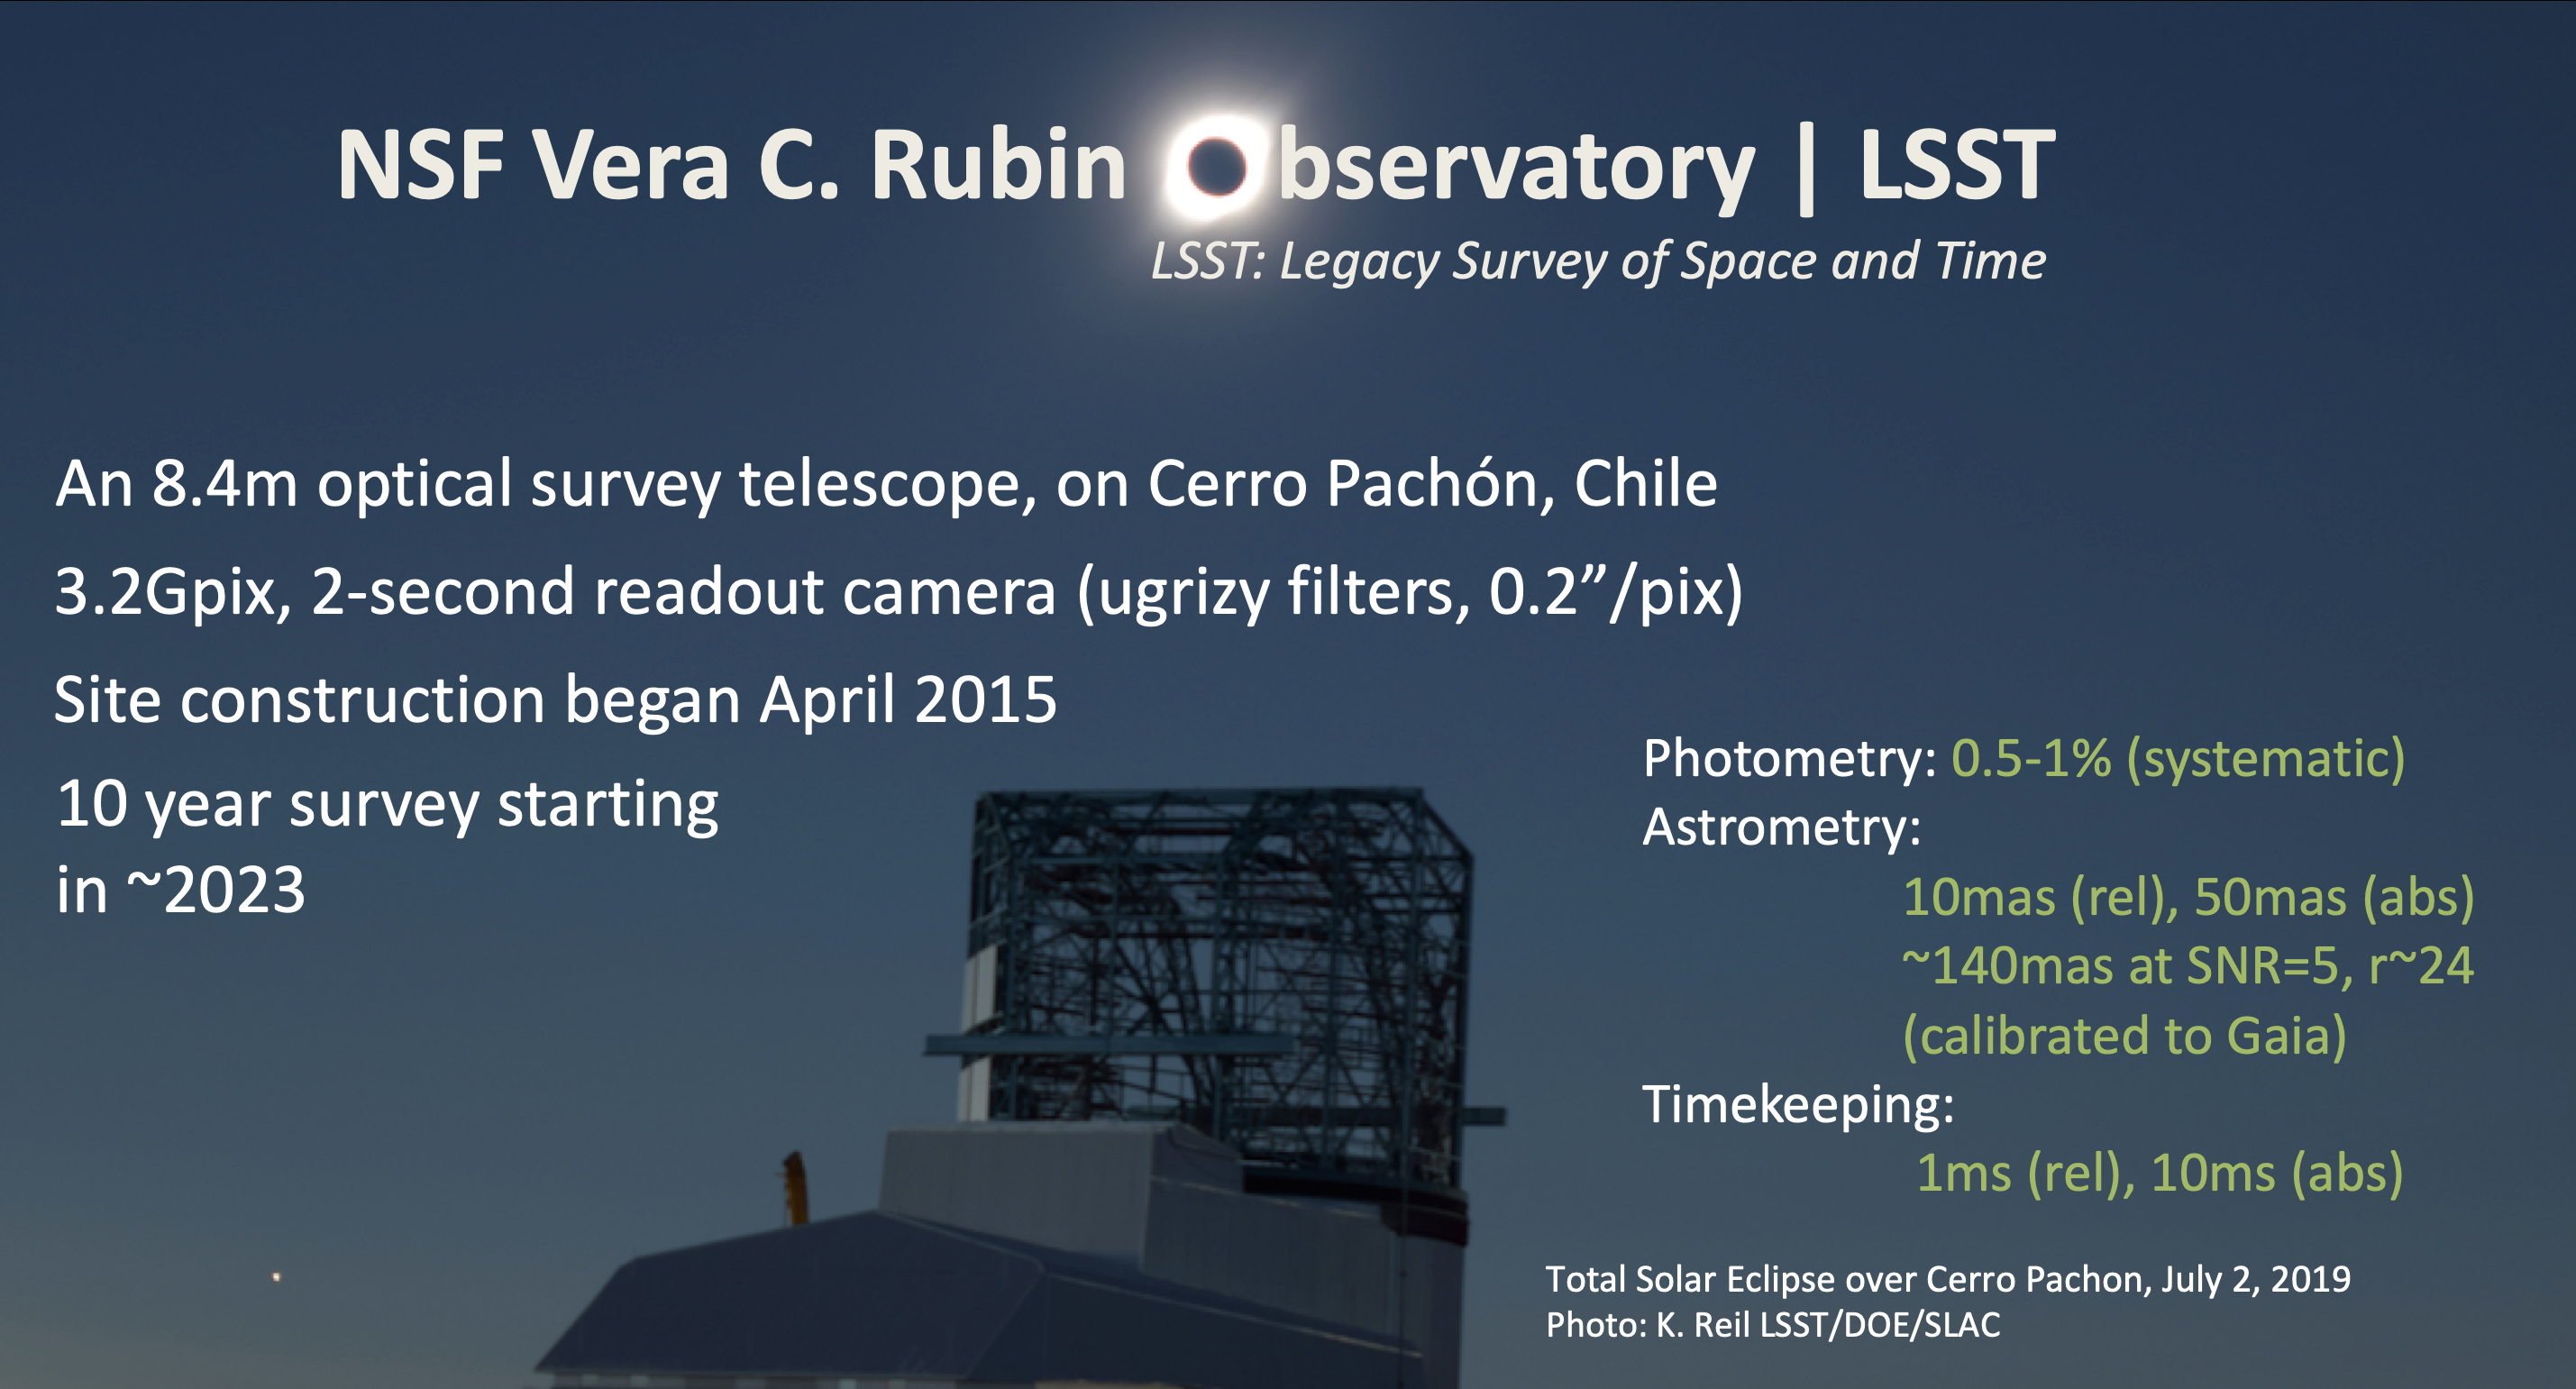 Figure defining Rubin Observatory and the LSST